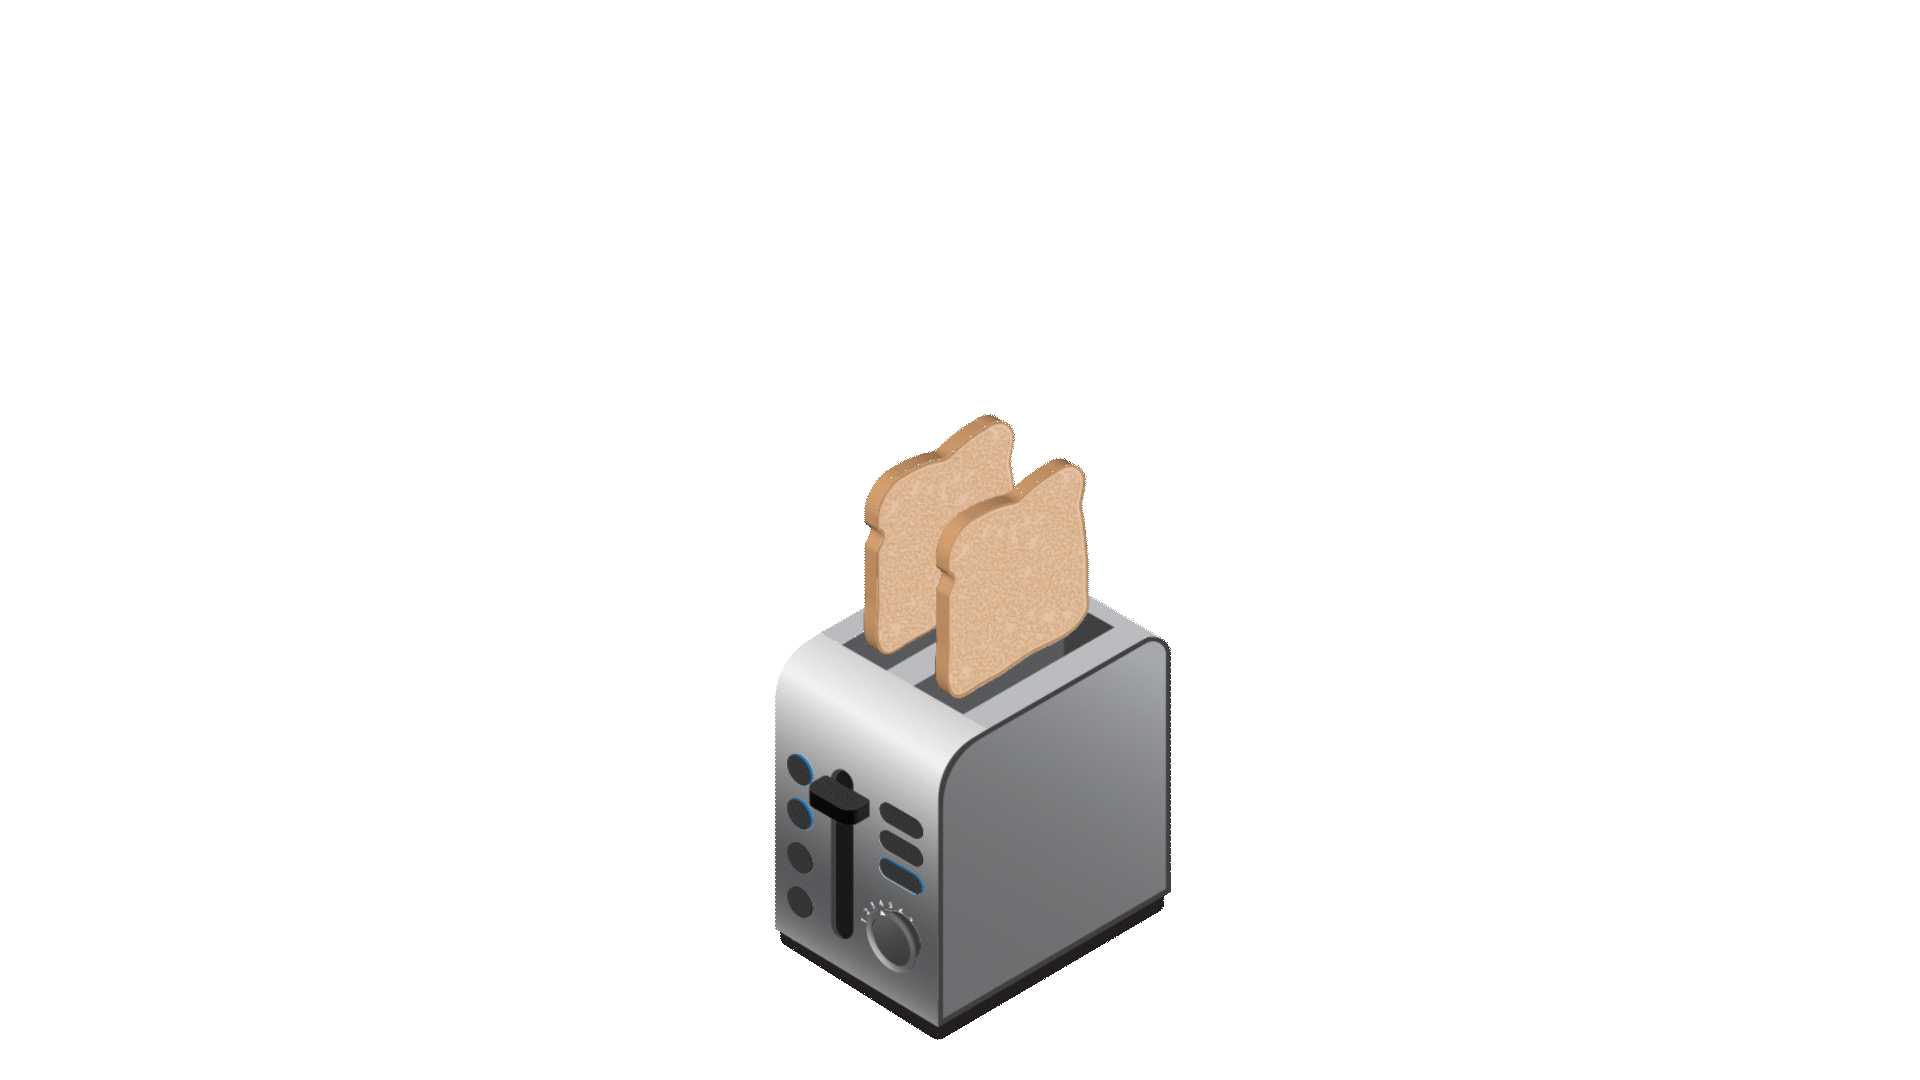 Gif of toast popping out of a toaster.